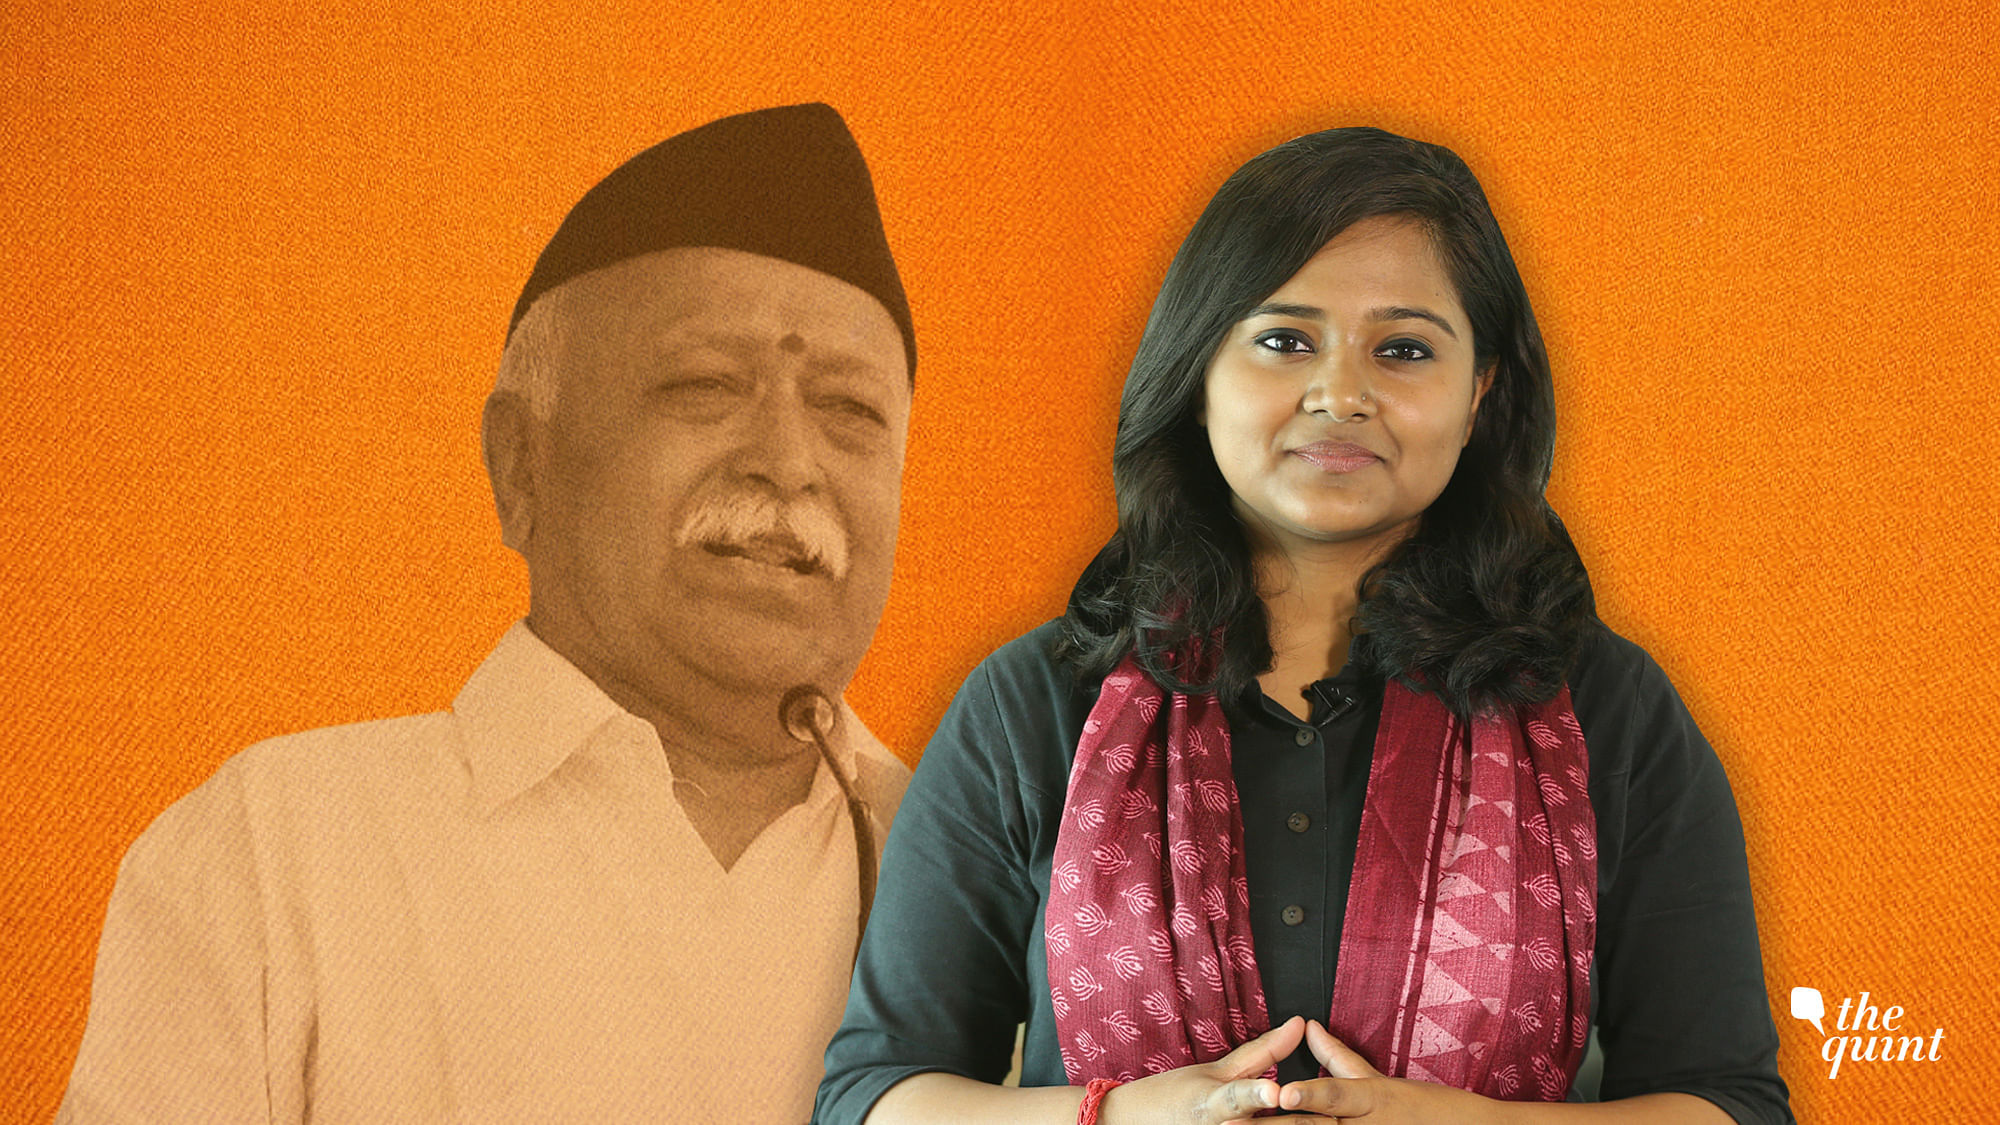 Will RSS chief Mohan Bhagwat’s words from the 3-day lecture series ring true with his foot soldiers?